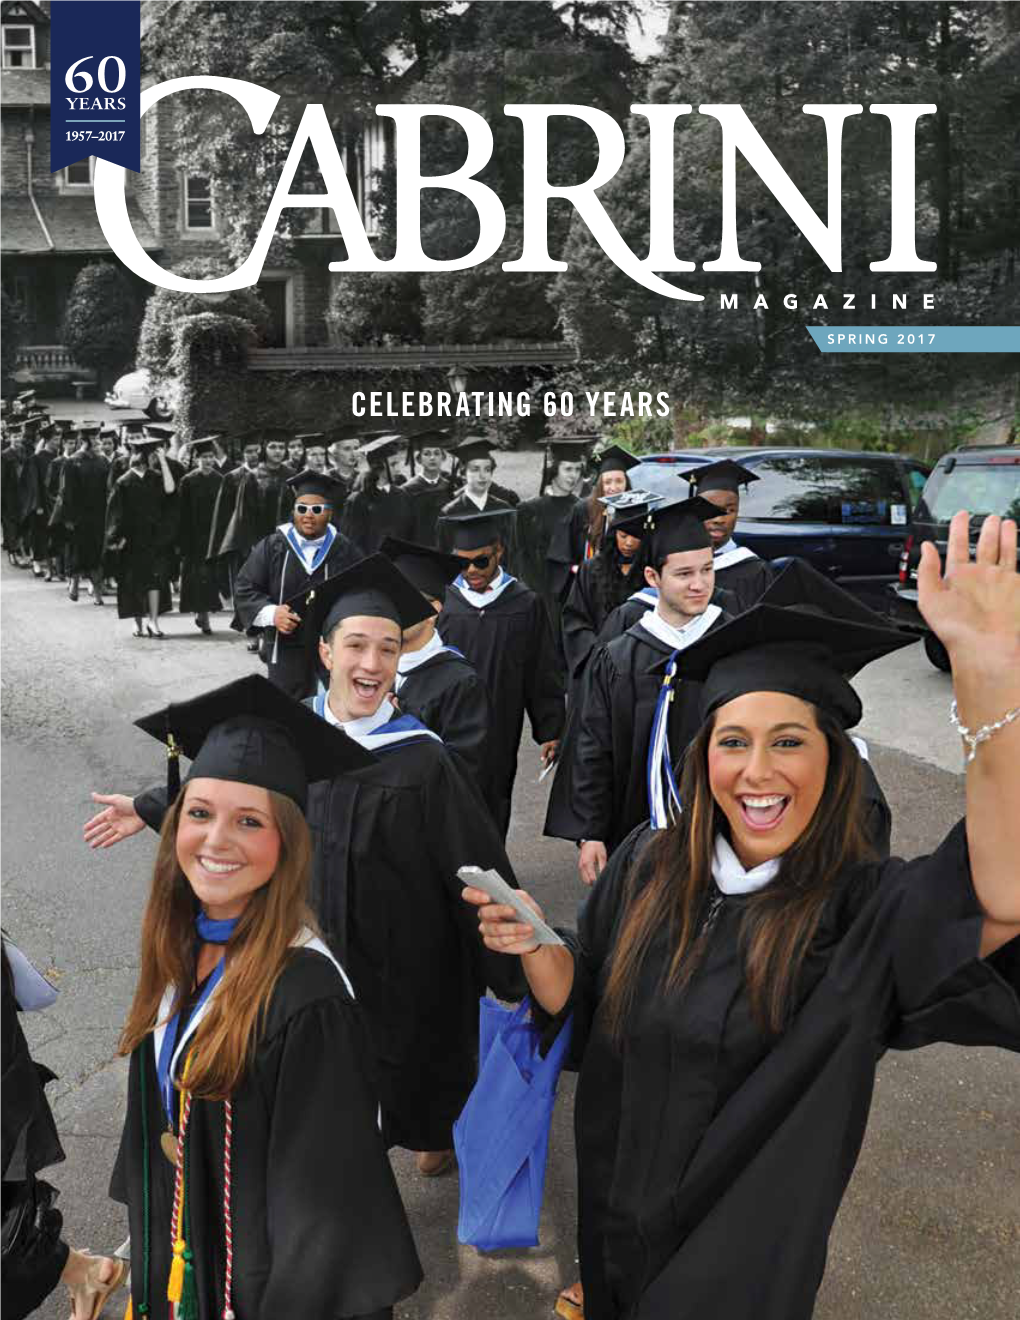 CELEBRATING 60 YEARS TABLE of CONTENTS SPRING 2017 CABRINI MAGAZINE FEATURE STORIES Is Published by the Marketing and Communications Office